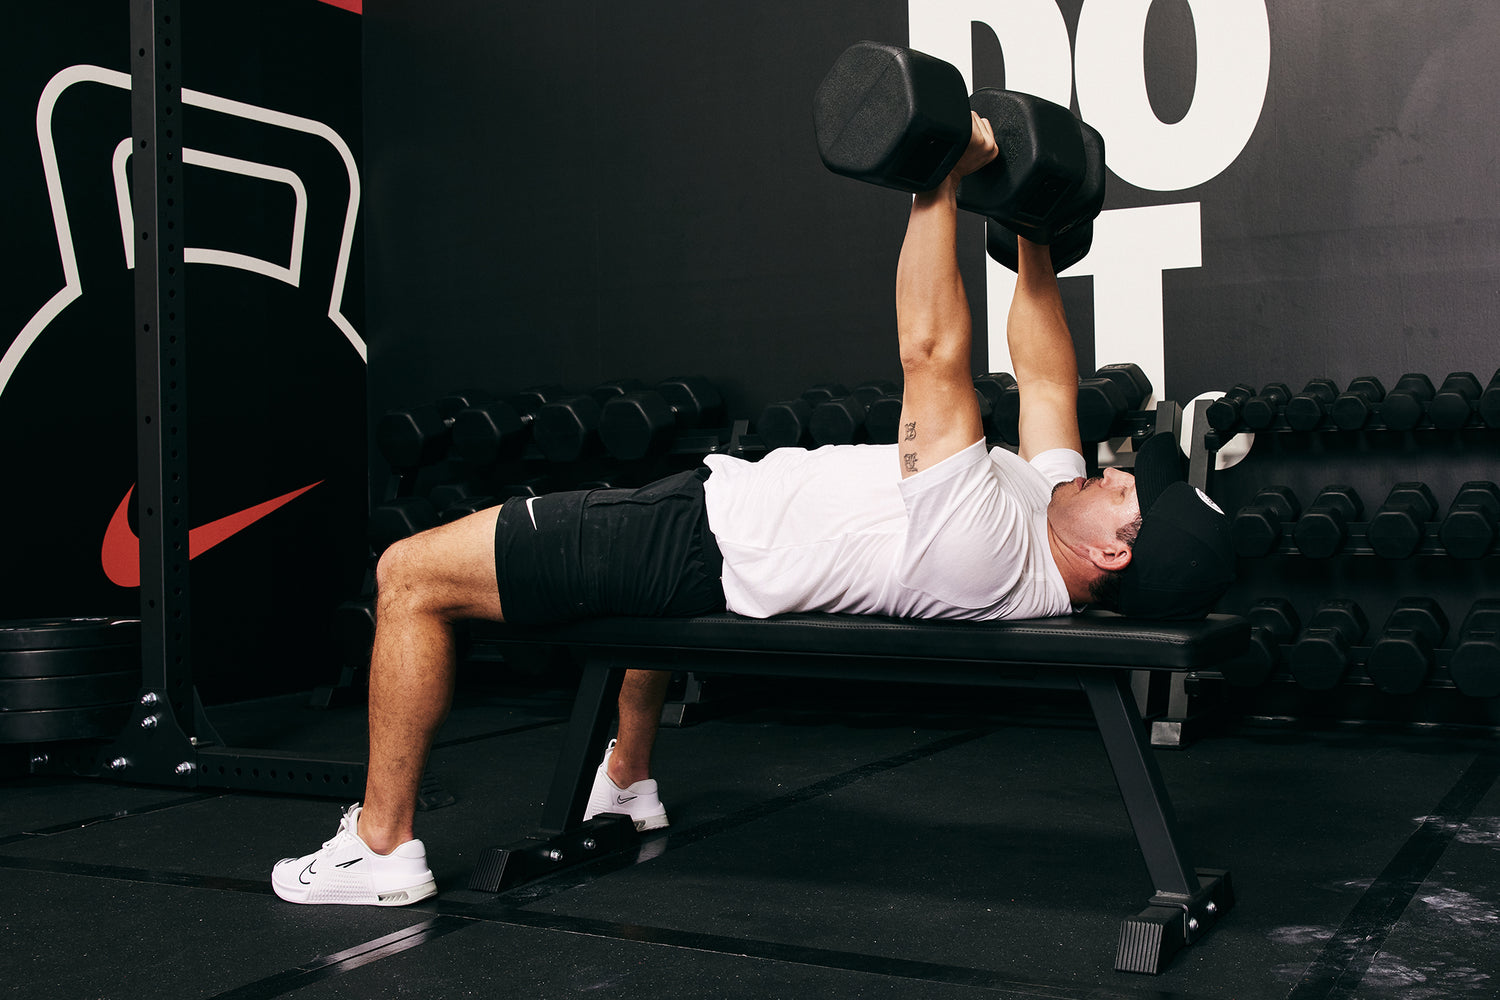 Male Athlete lying on the Nike Flat Weight Bench and bench pressing Nike Dumbbells